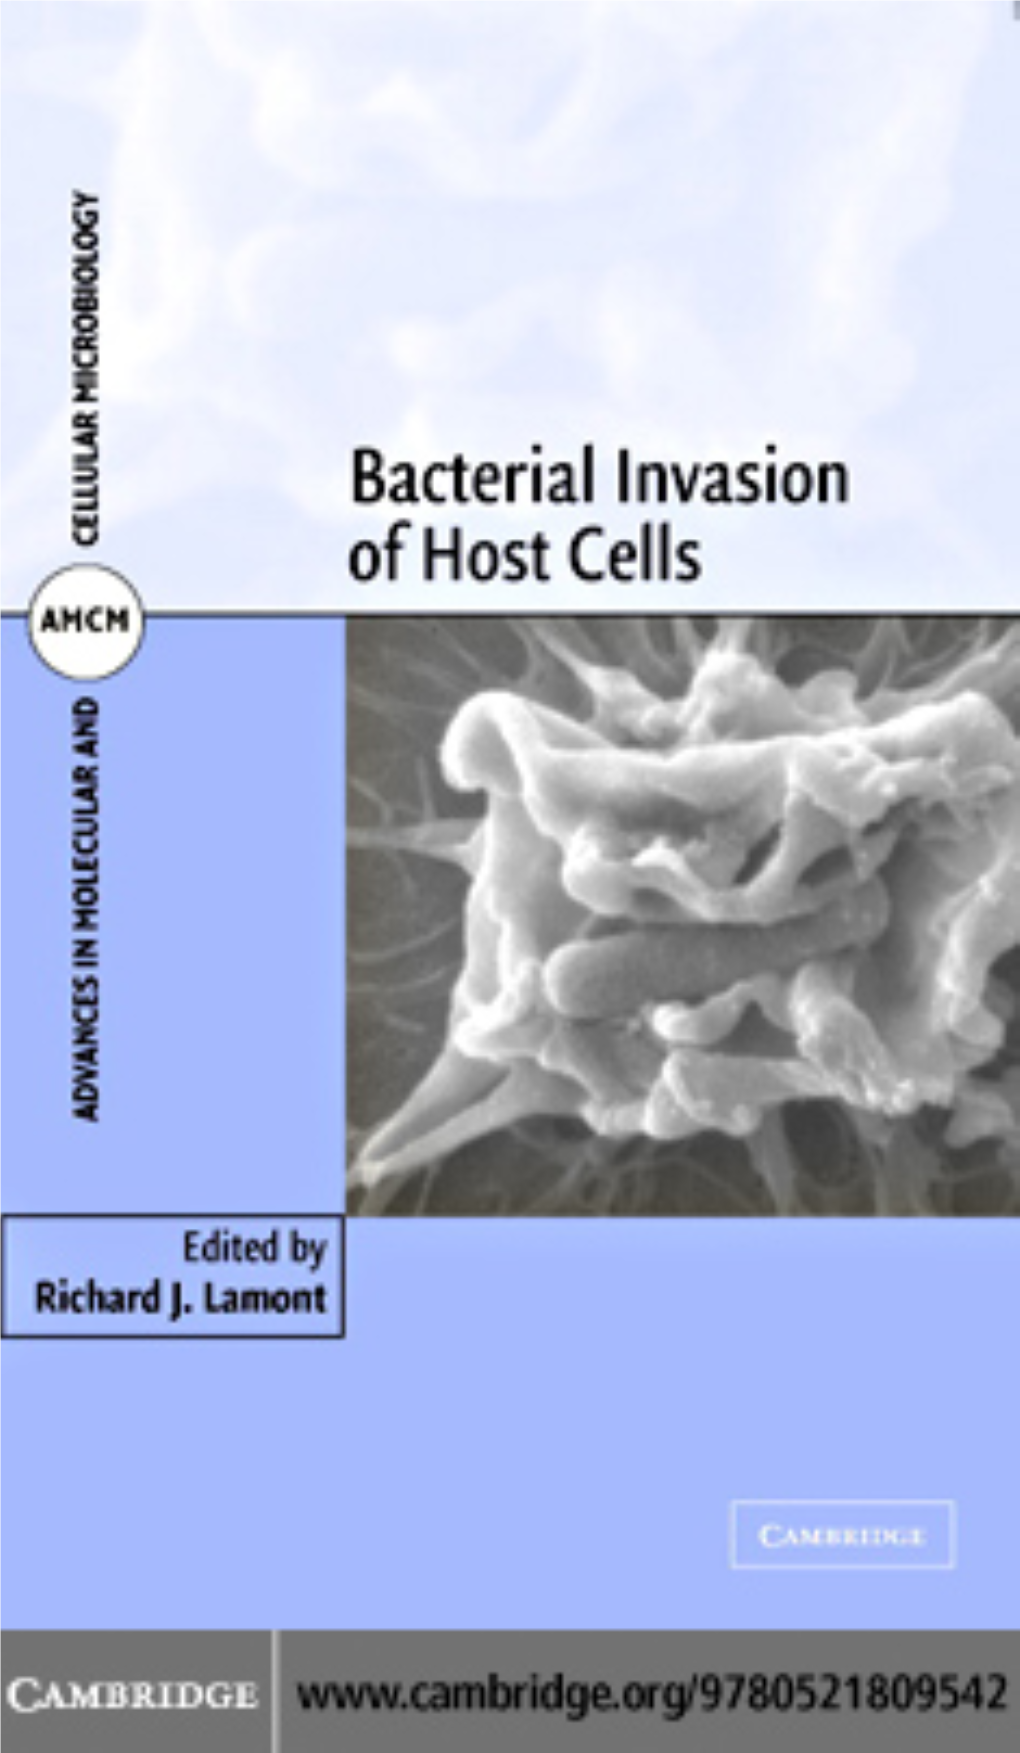 Bacterial Invasion of Host Cells